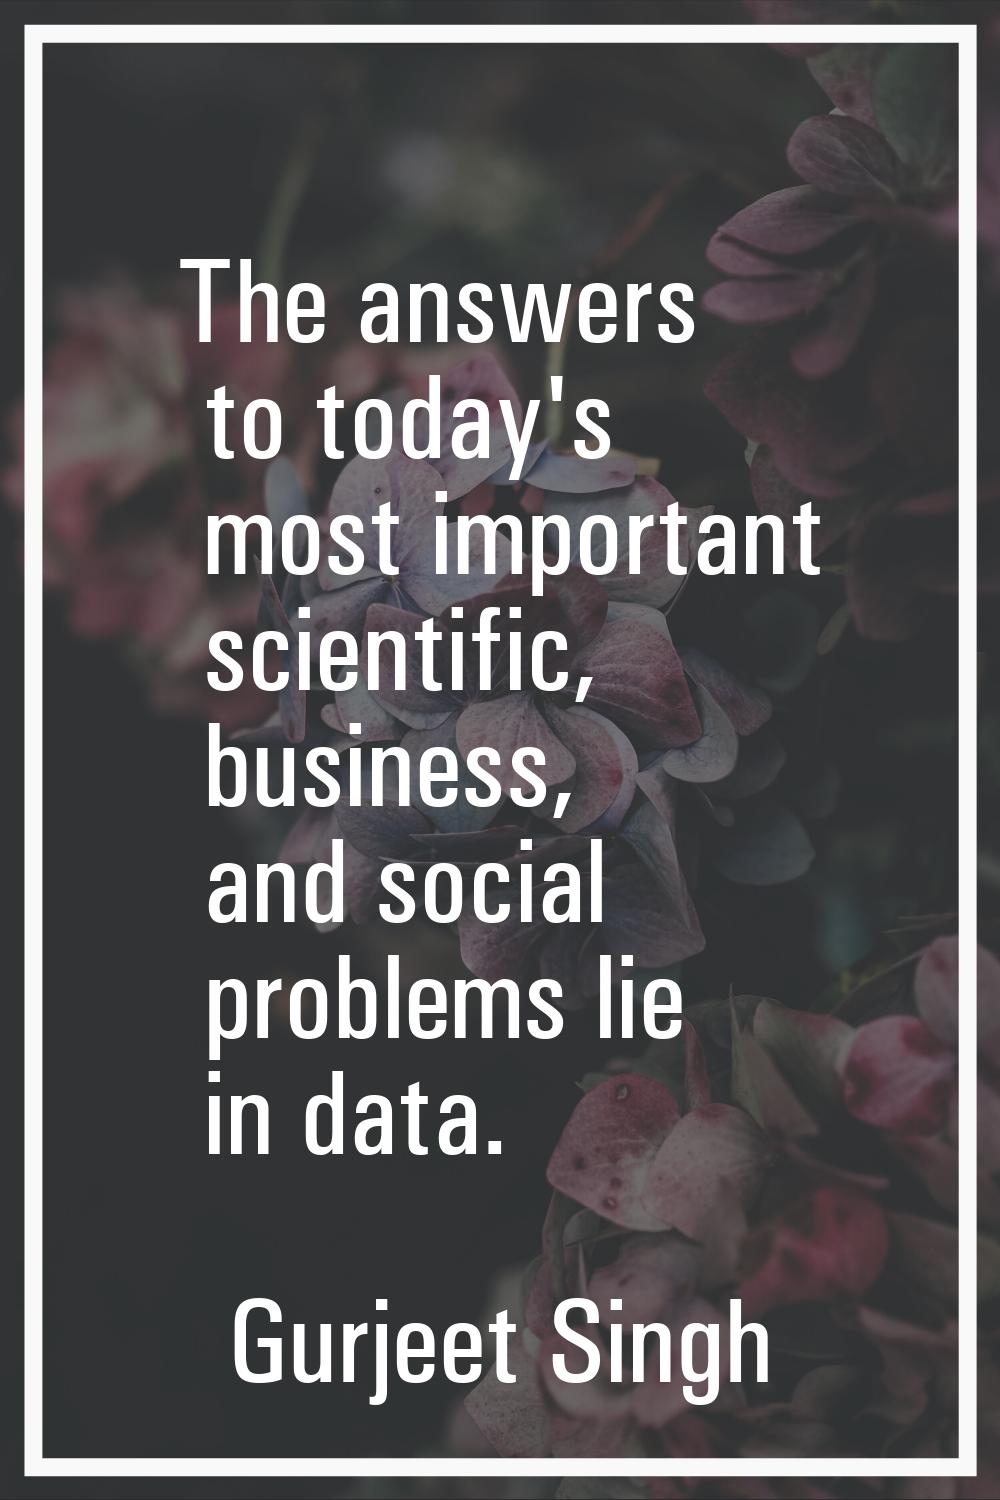 The answers to today's most important scientific, business, and social problems lie in data.